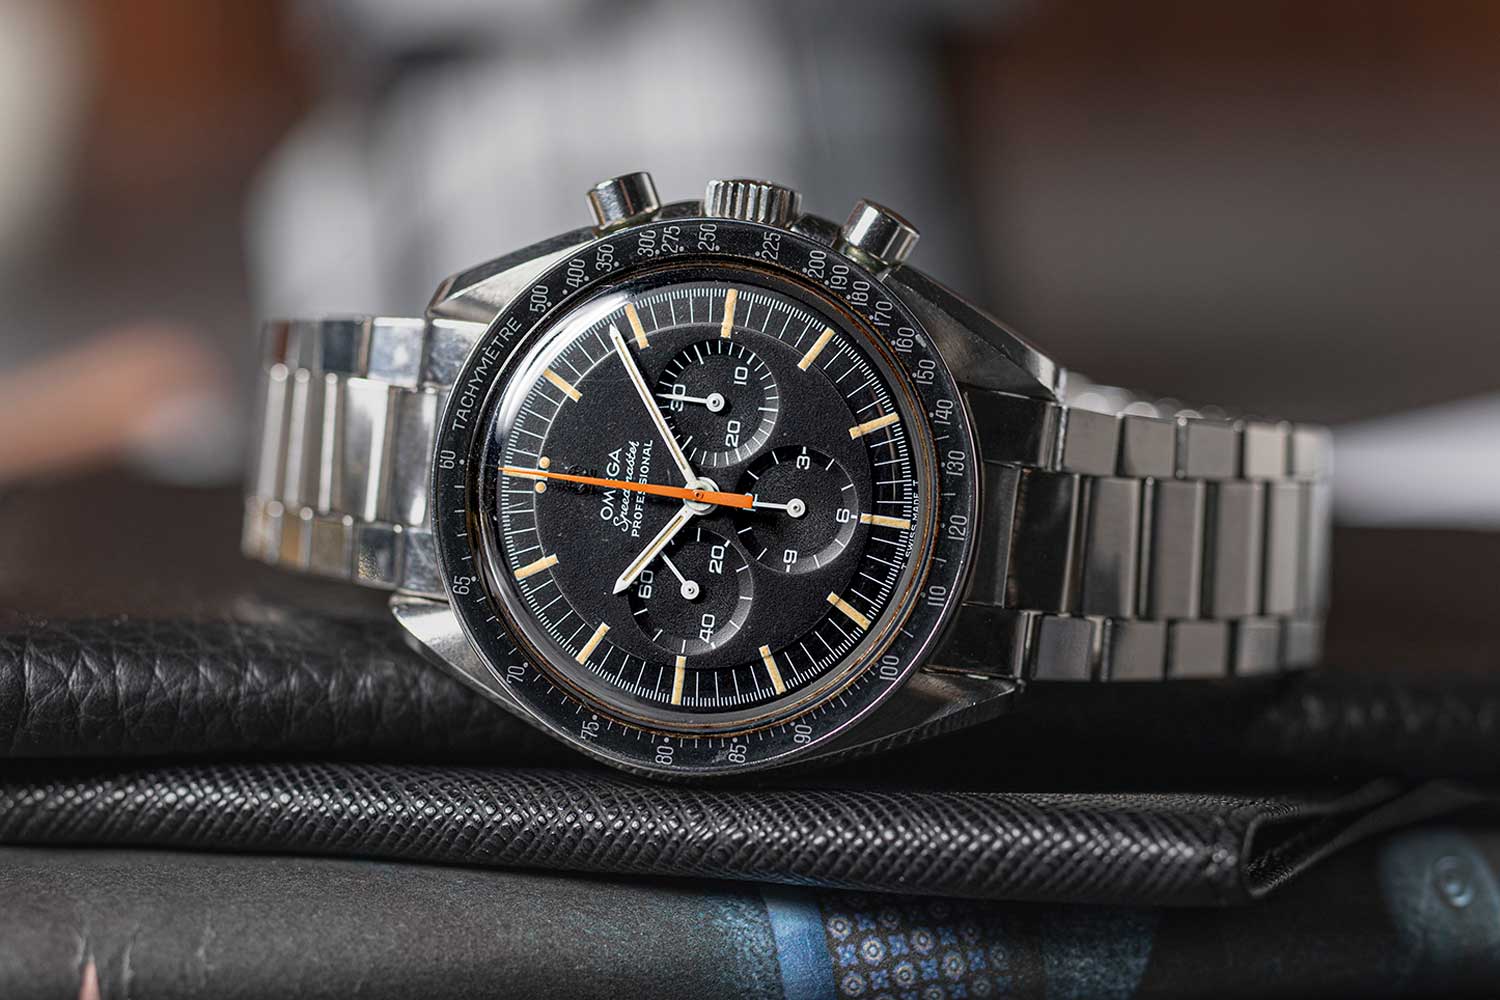 An “Ultraman” is an Omega Speedmaster model 145.012-67, one of the three models that went to space and the very last Speedy to feature the hallowed calibre 321.